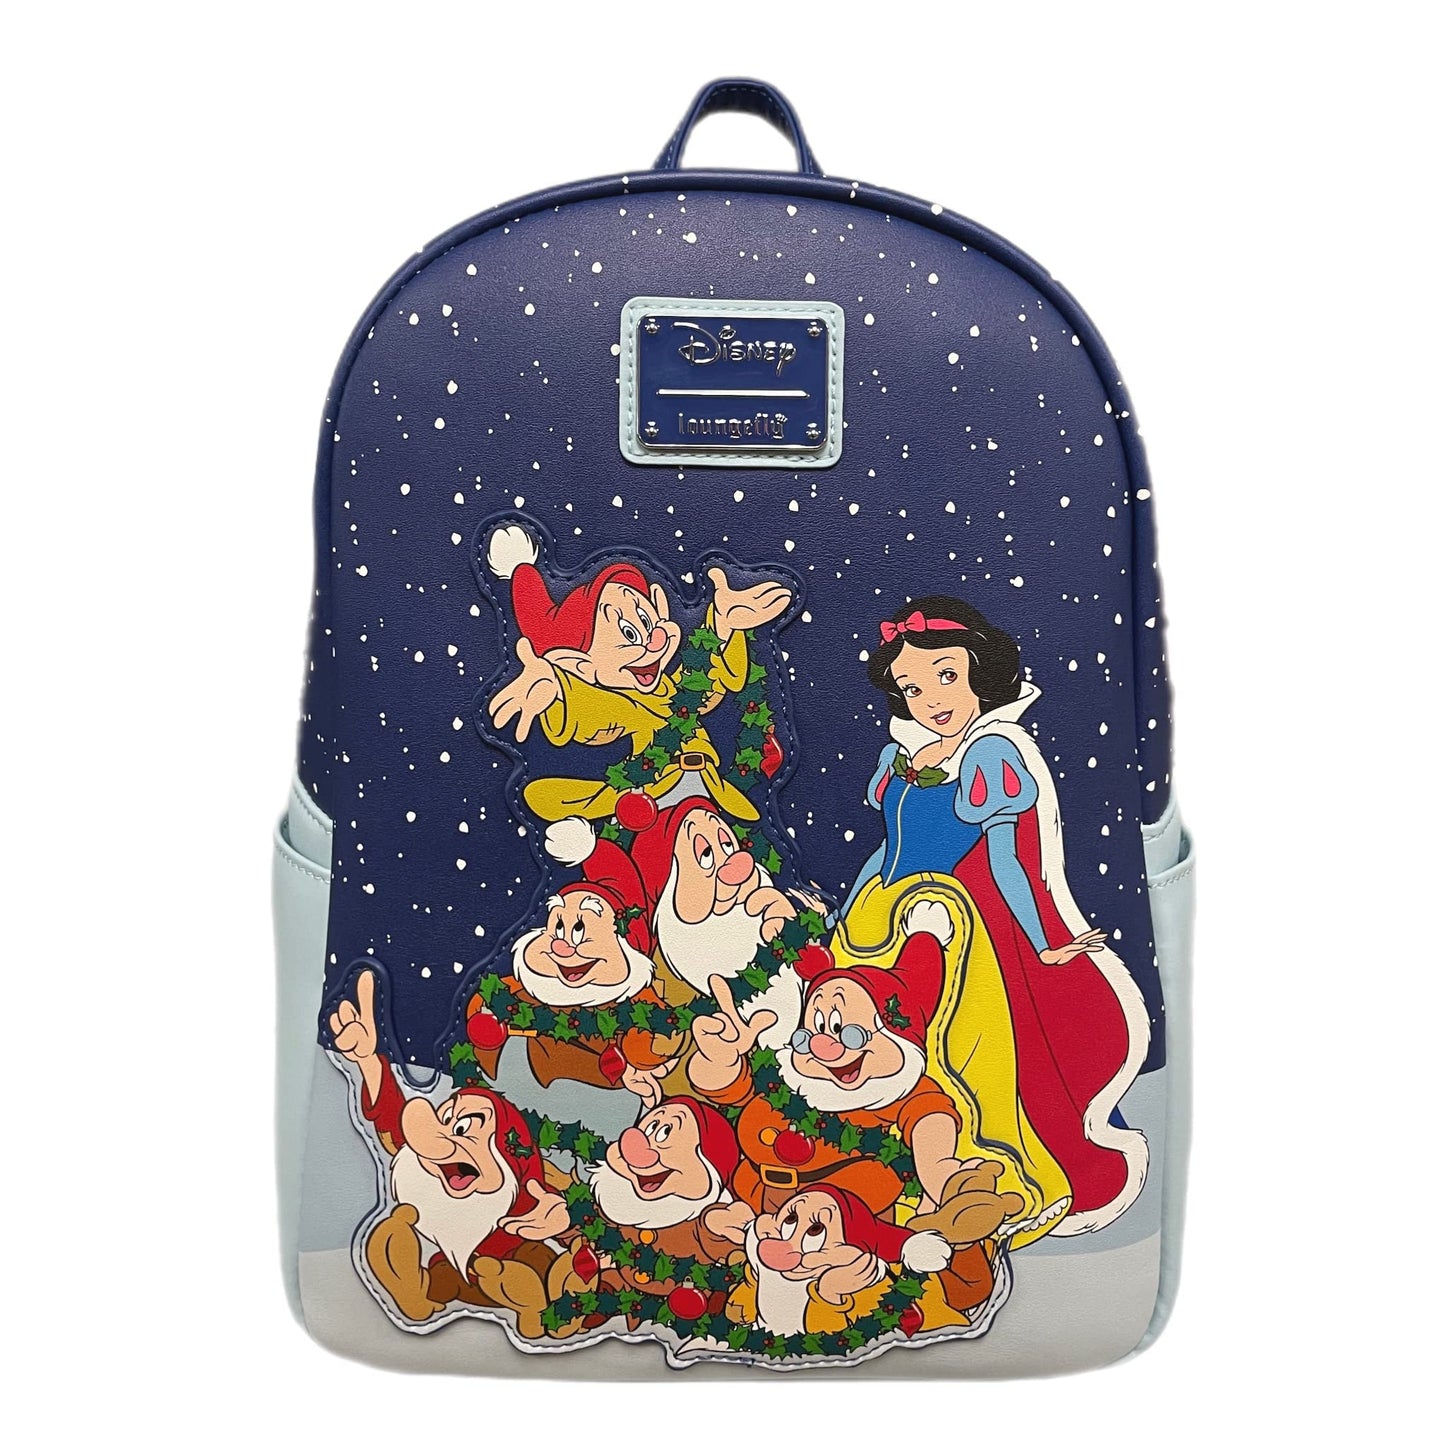 Loungefly Disney 85th Anniversary Snow White and the Seven Dwarfs Holiday Mini Backpack